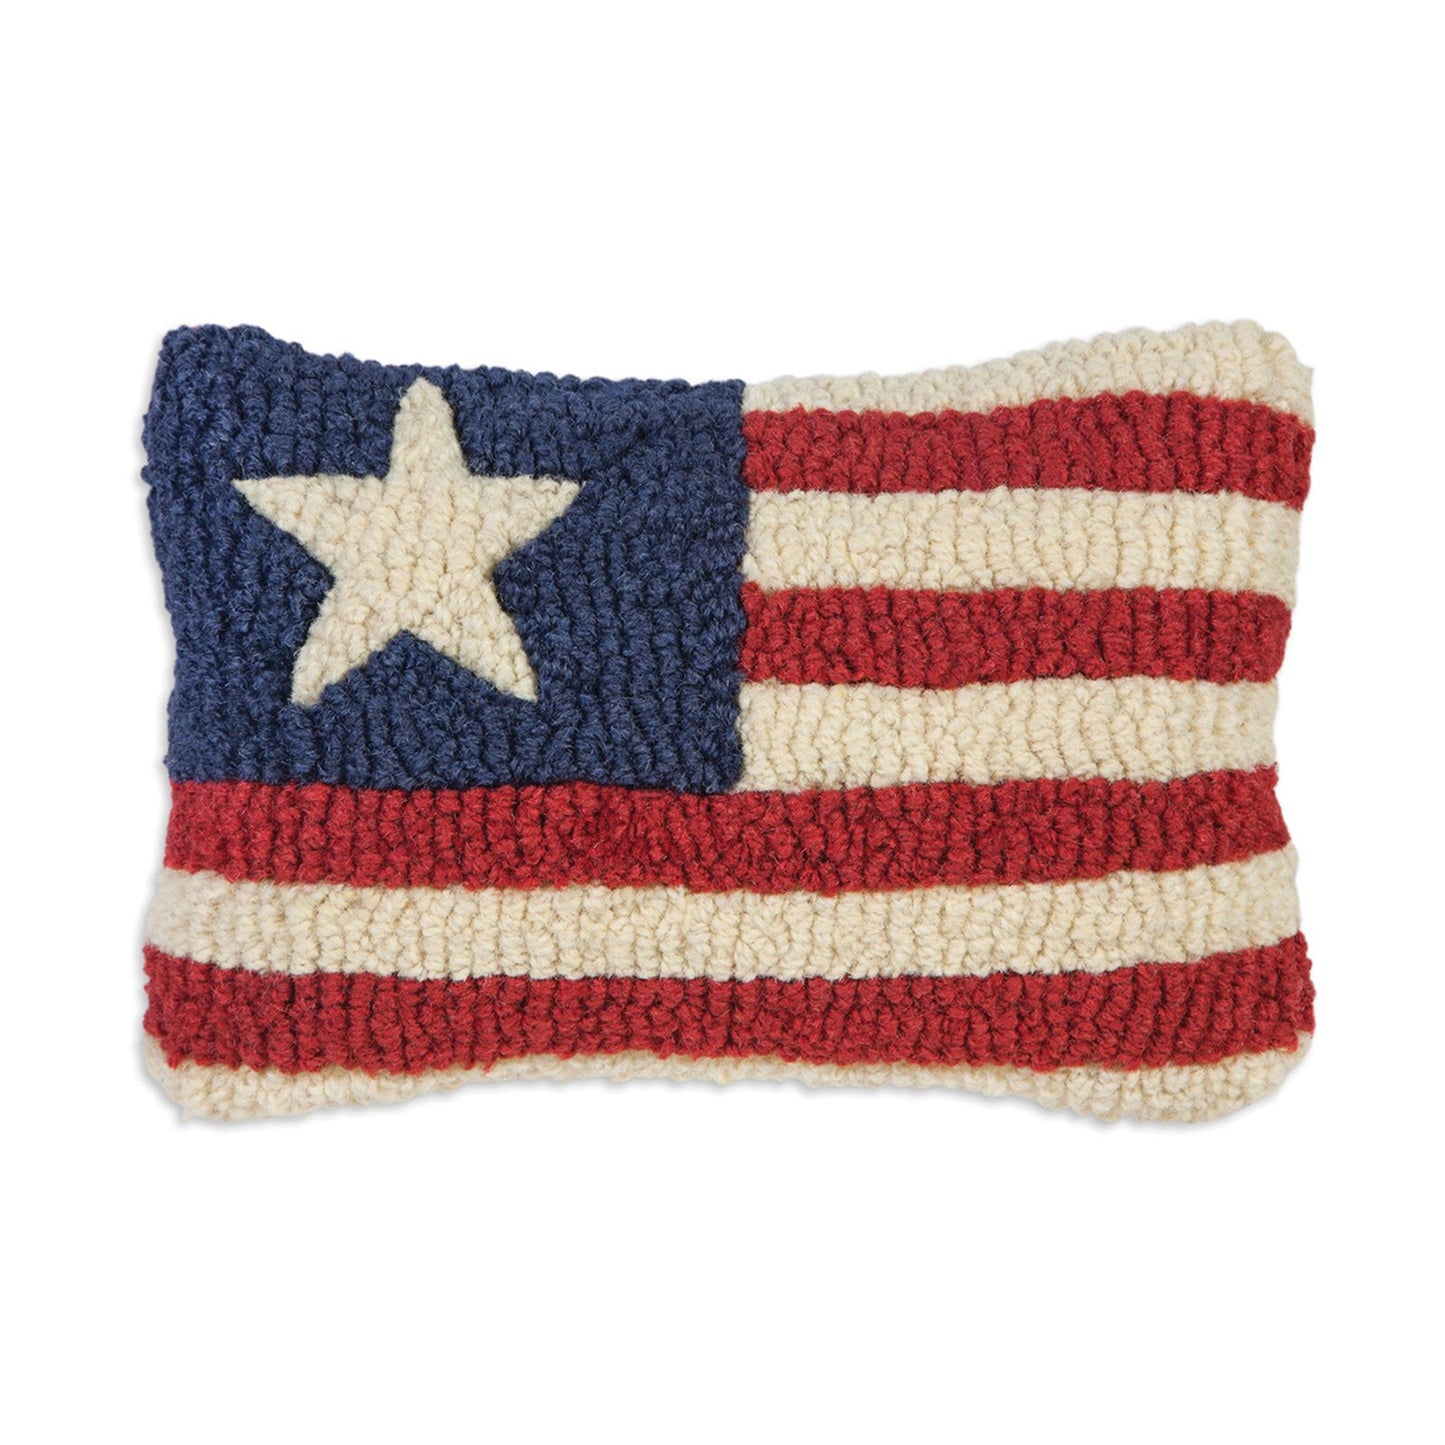 Stars & Stripes Small Hooked Wool Pillow